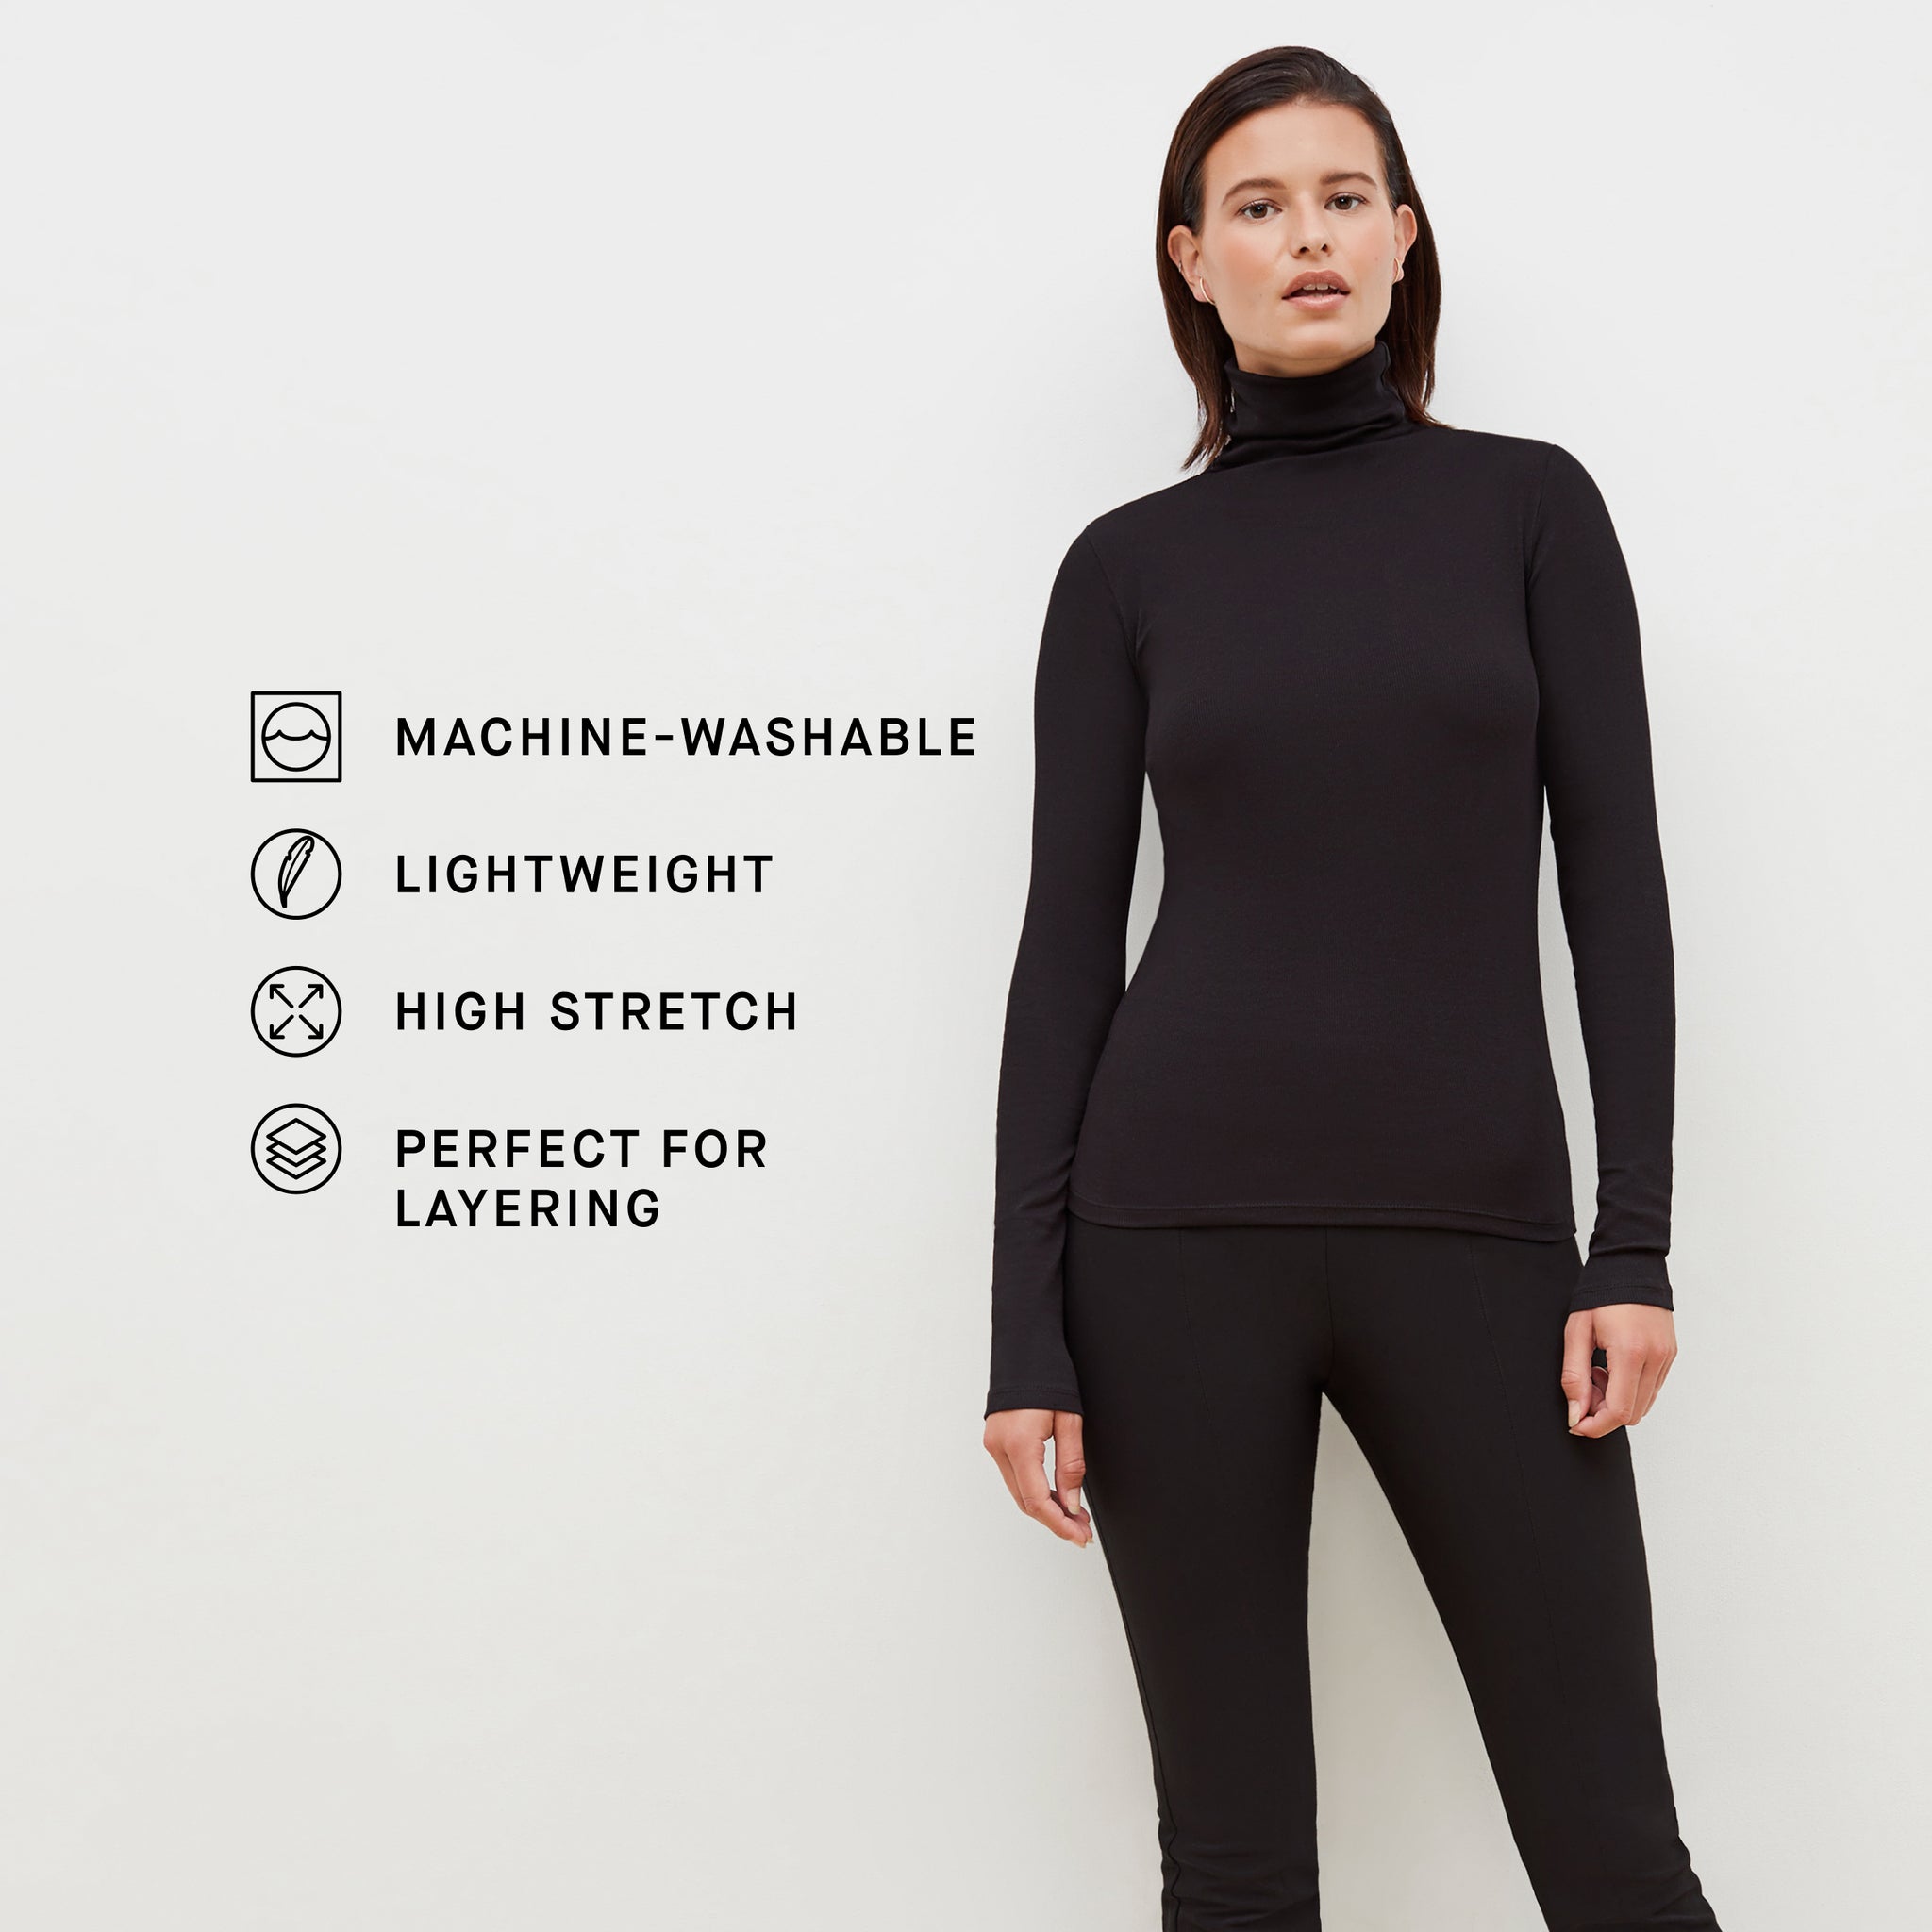 image of a woman wearing the axam t-shirt in black with the product features listed